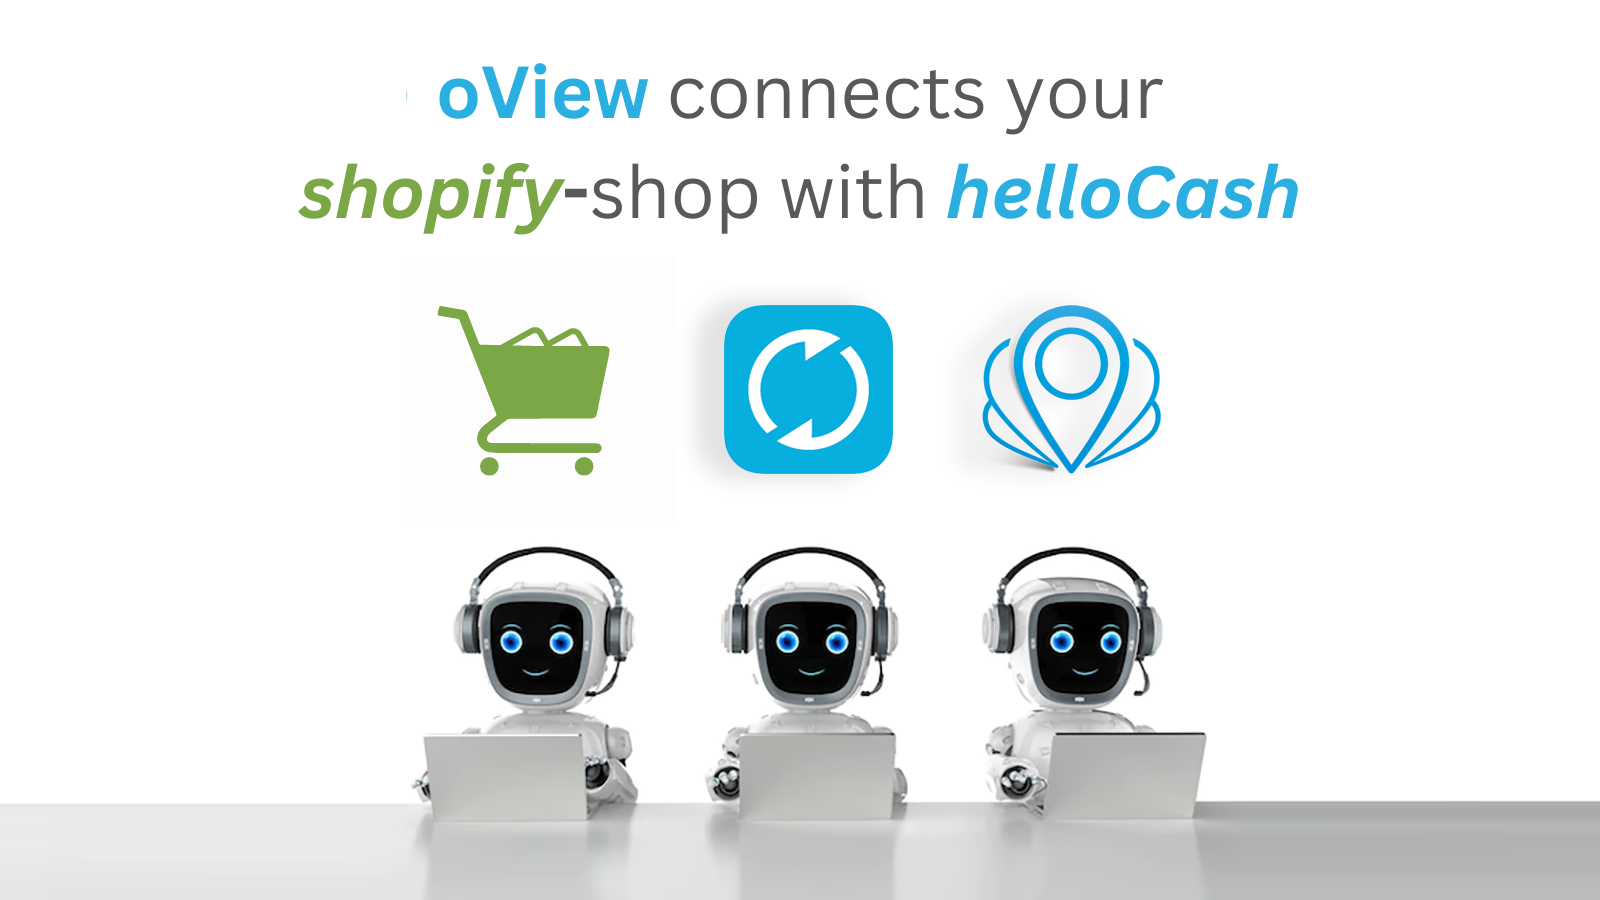 oView connects your shopify store to helloCash POS